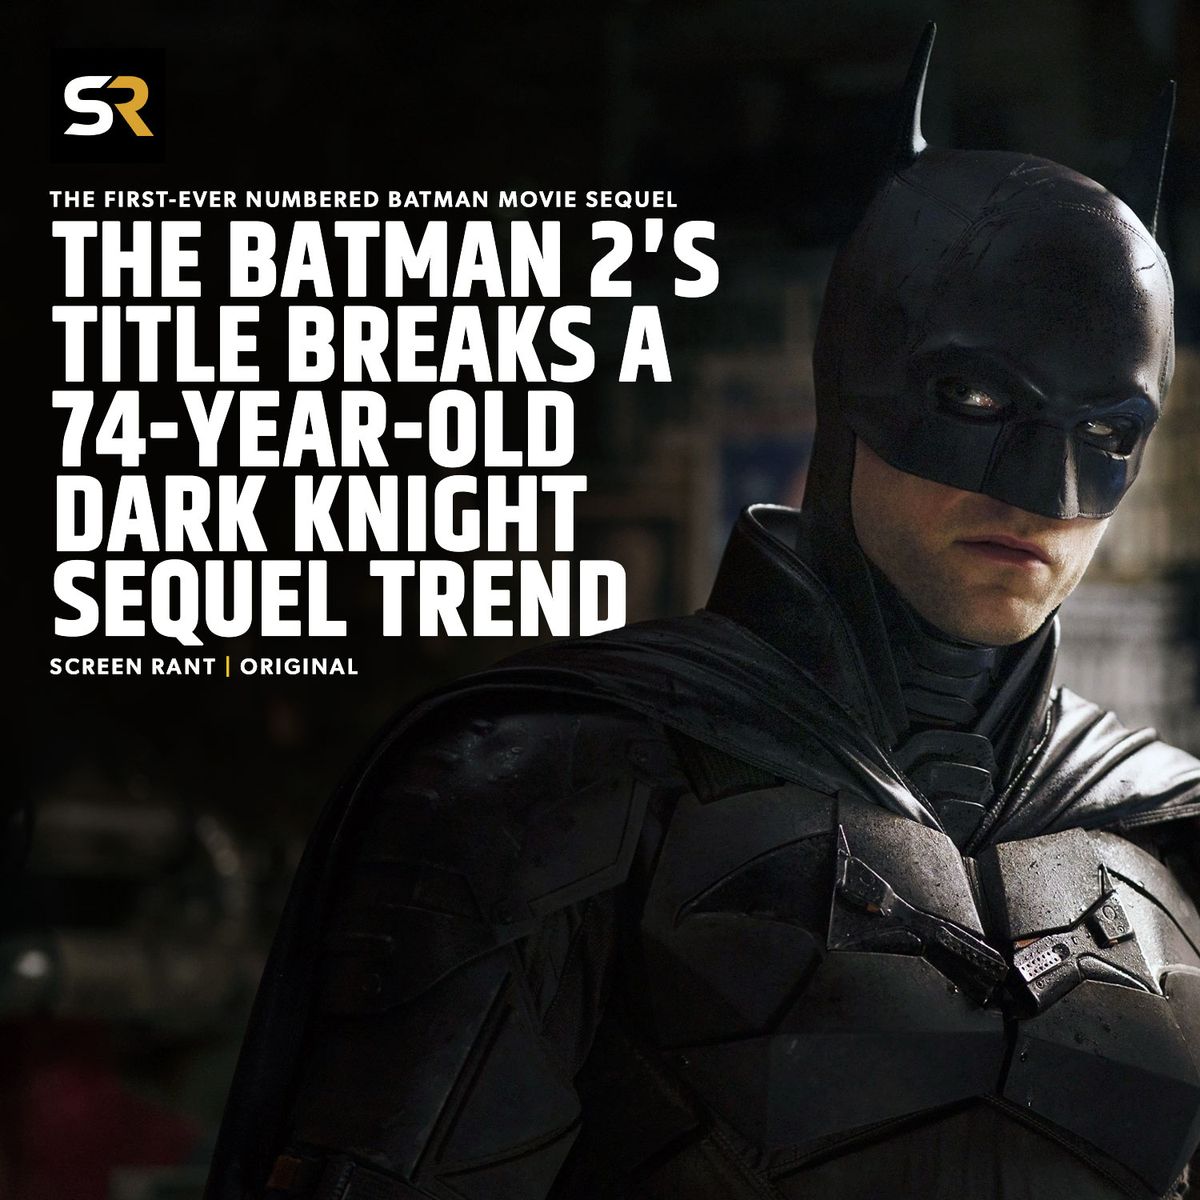 The sequel to Matt Reeves’ #TheBatman is set to break a decades-old #Batman trend. It marks a first in #Batman’s film history as it’s the first sequel ... to be numbered! 😅 From 'Batman Returns' to 'The Dark Knight Rises,' it's the first Batman 2! 🦇 bit.ly/3WVGZCV